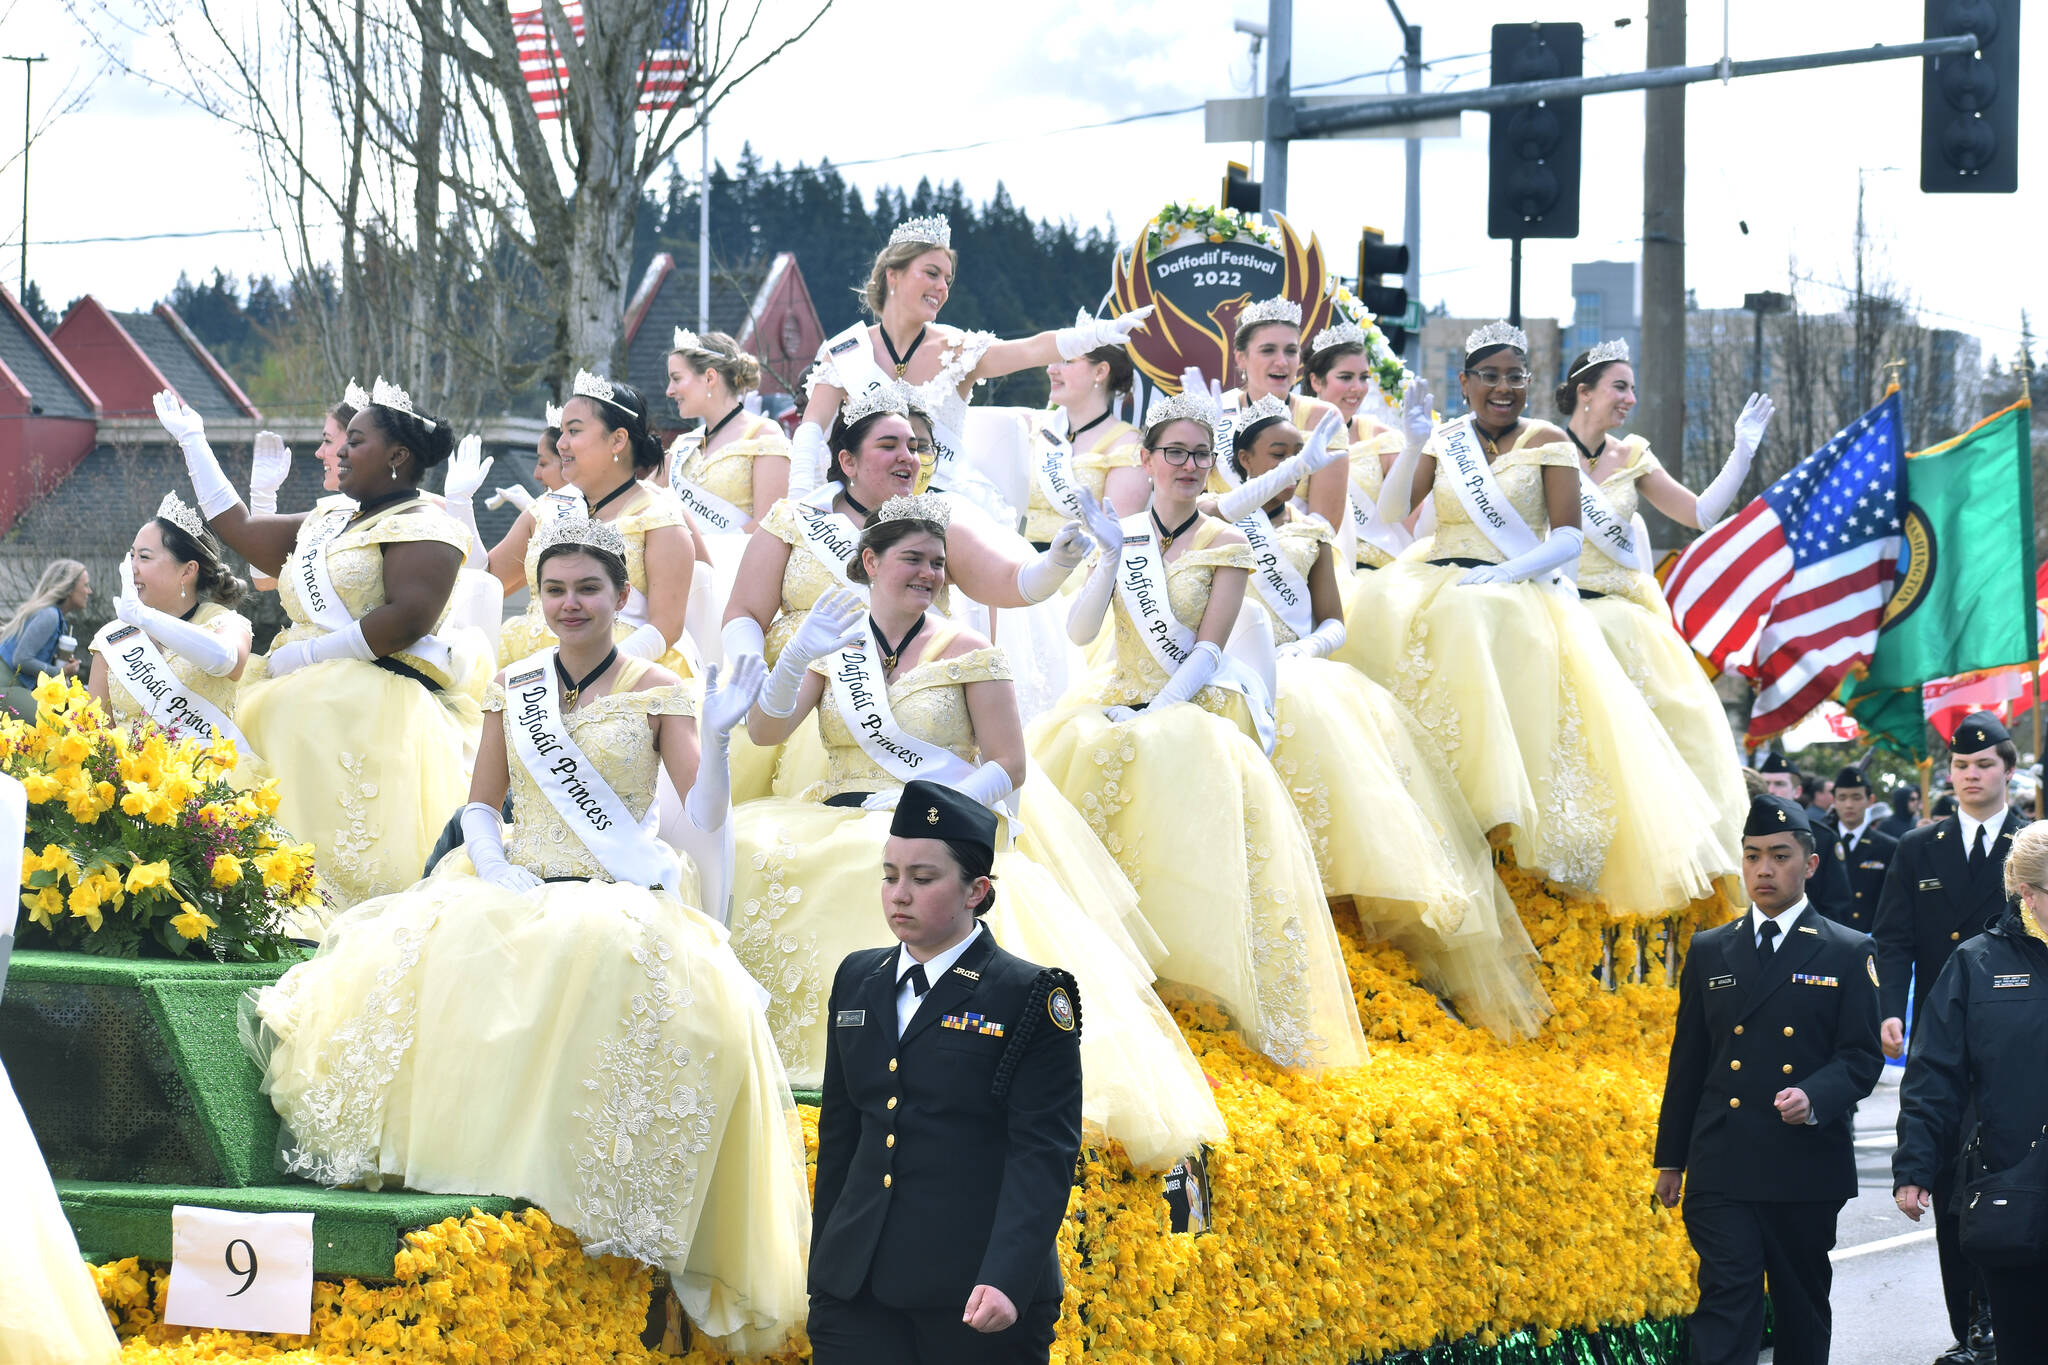 The Daffodil Festival Princesses parade down South Meridian in Puyallup. Photo by Alex Bruell